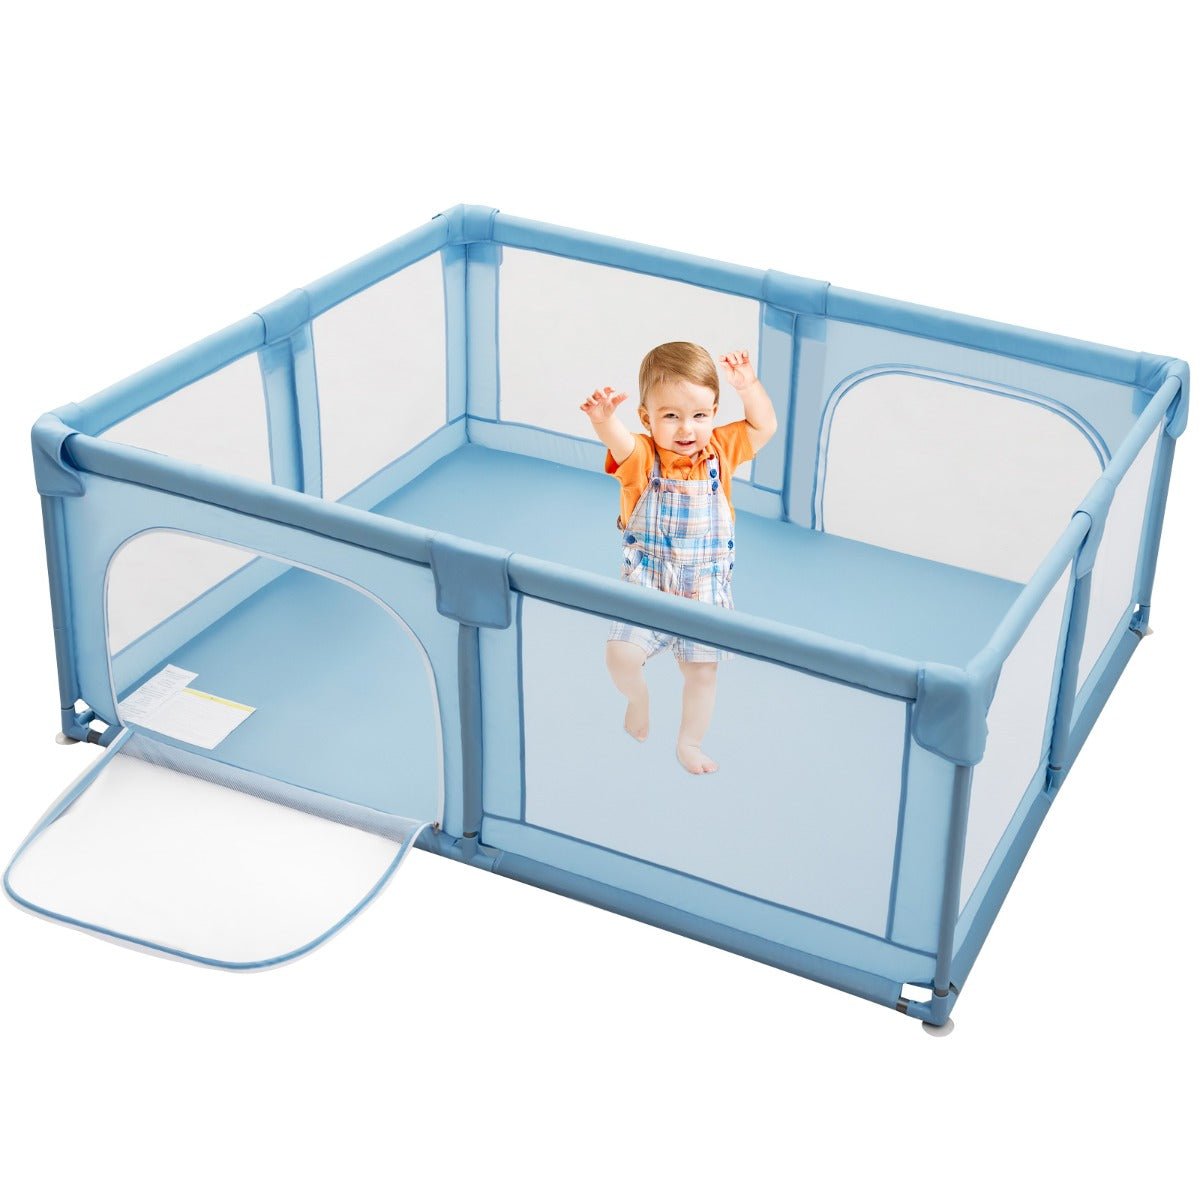 Infant Play Area in Blue with Safety Lock